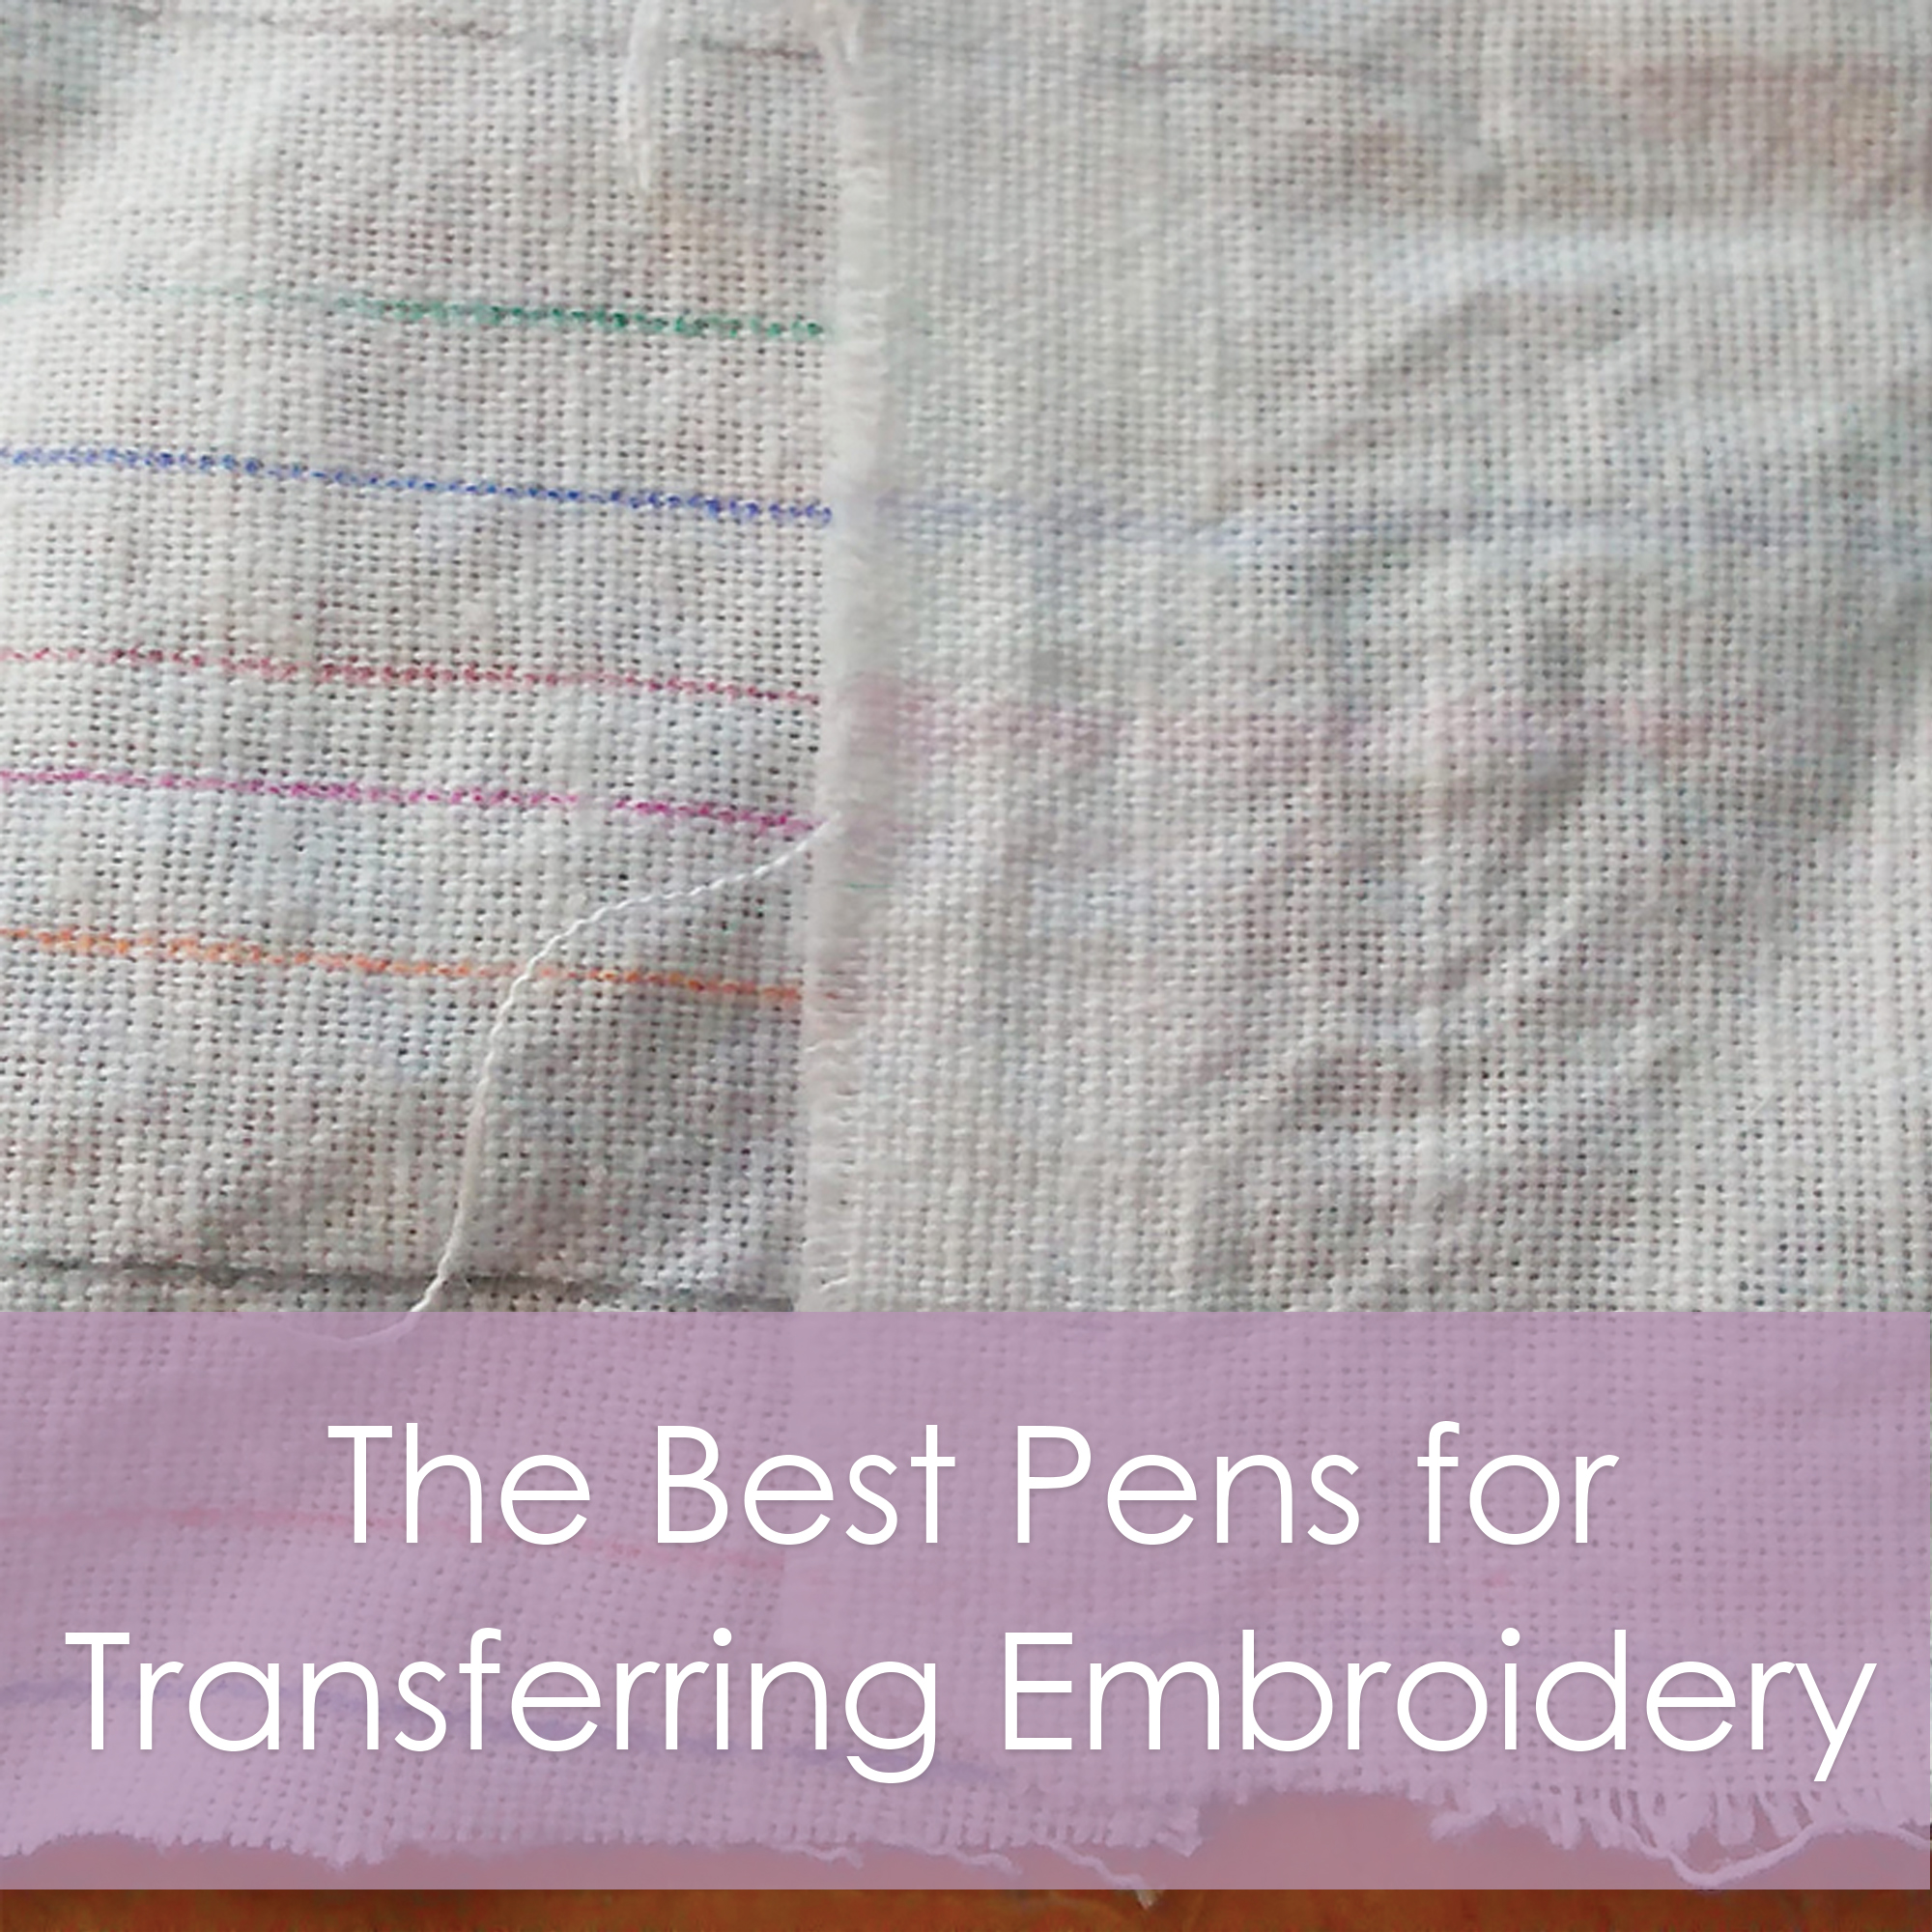 The best pens for transferring embroidery designs - a review from Muse of the Morning